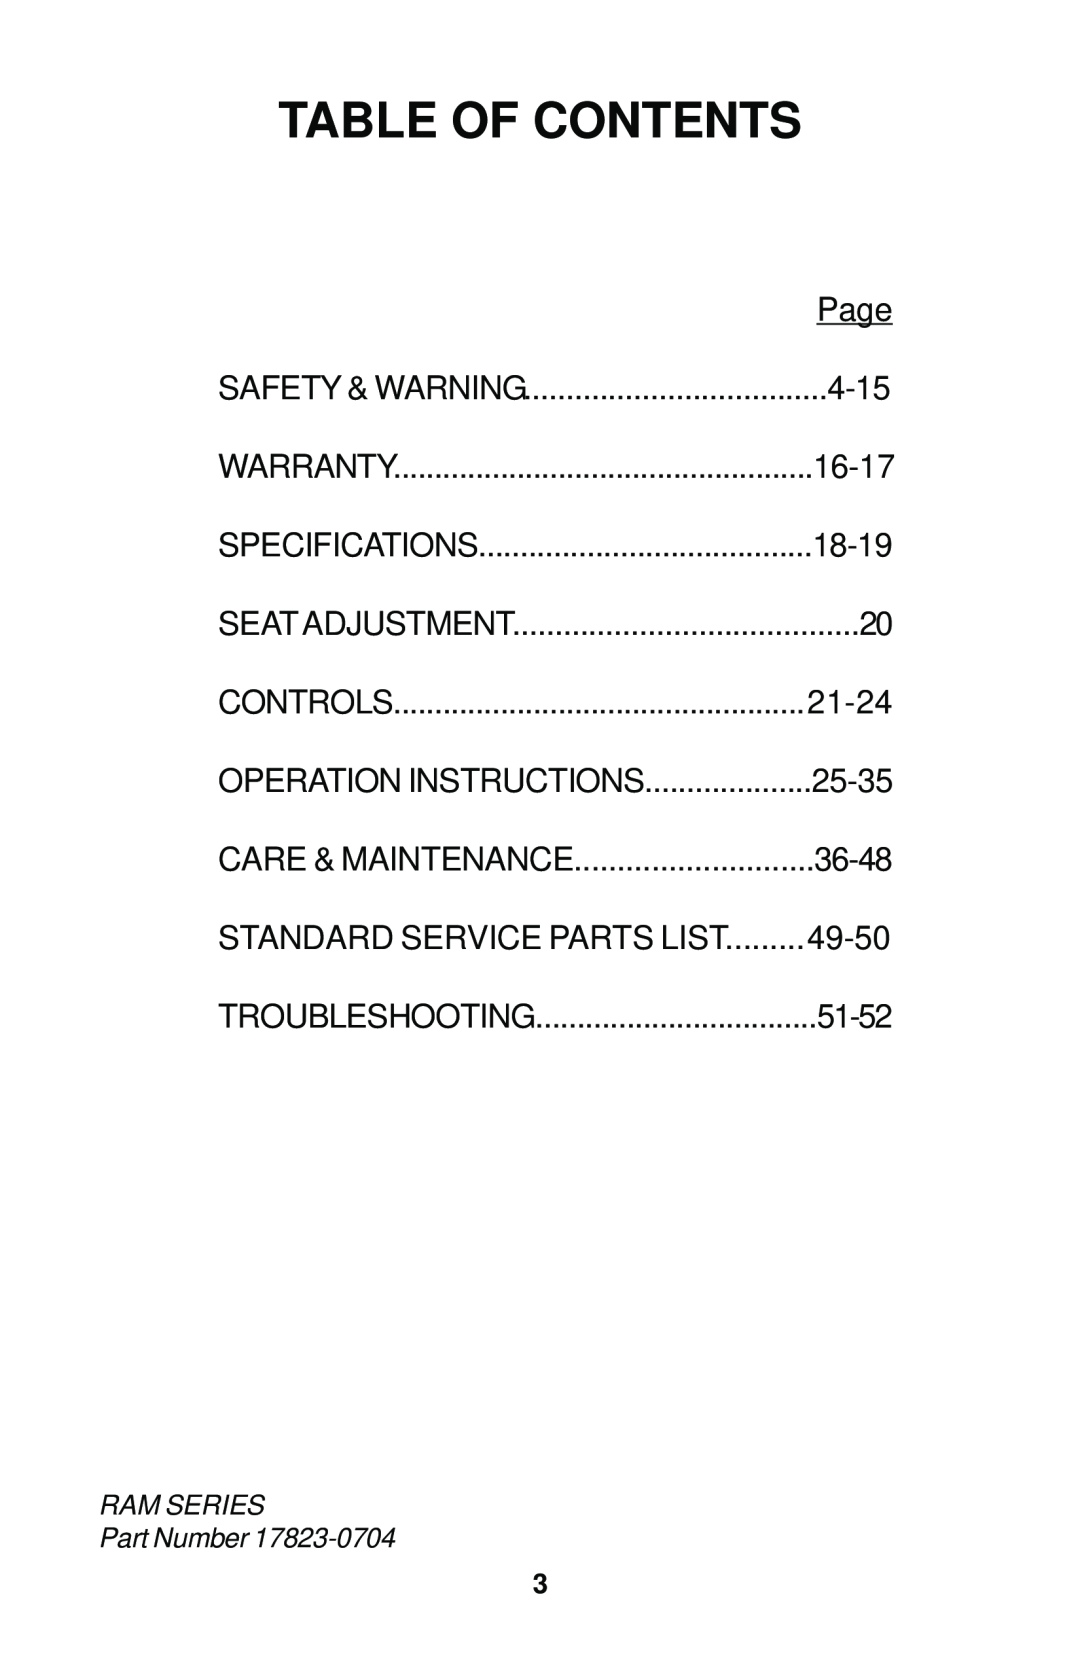 Dixon 42, 44, 50, 44 MAG, 50 MAG Table Of Contents, Safety & Warning, Warranty, Specifications, Operation Instructions 